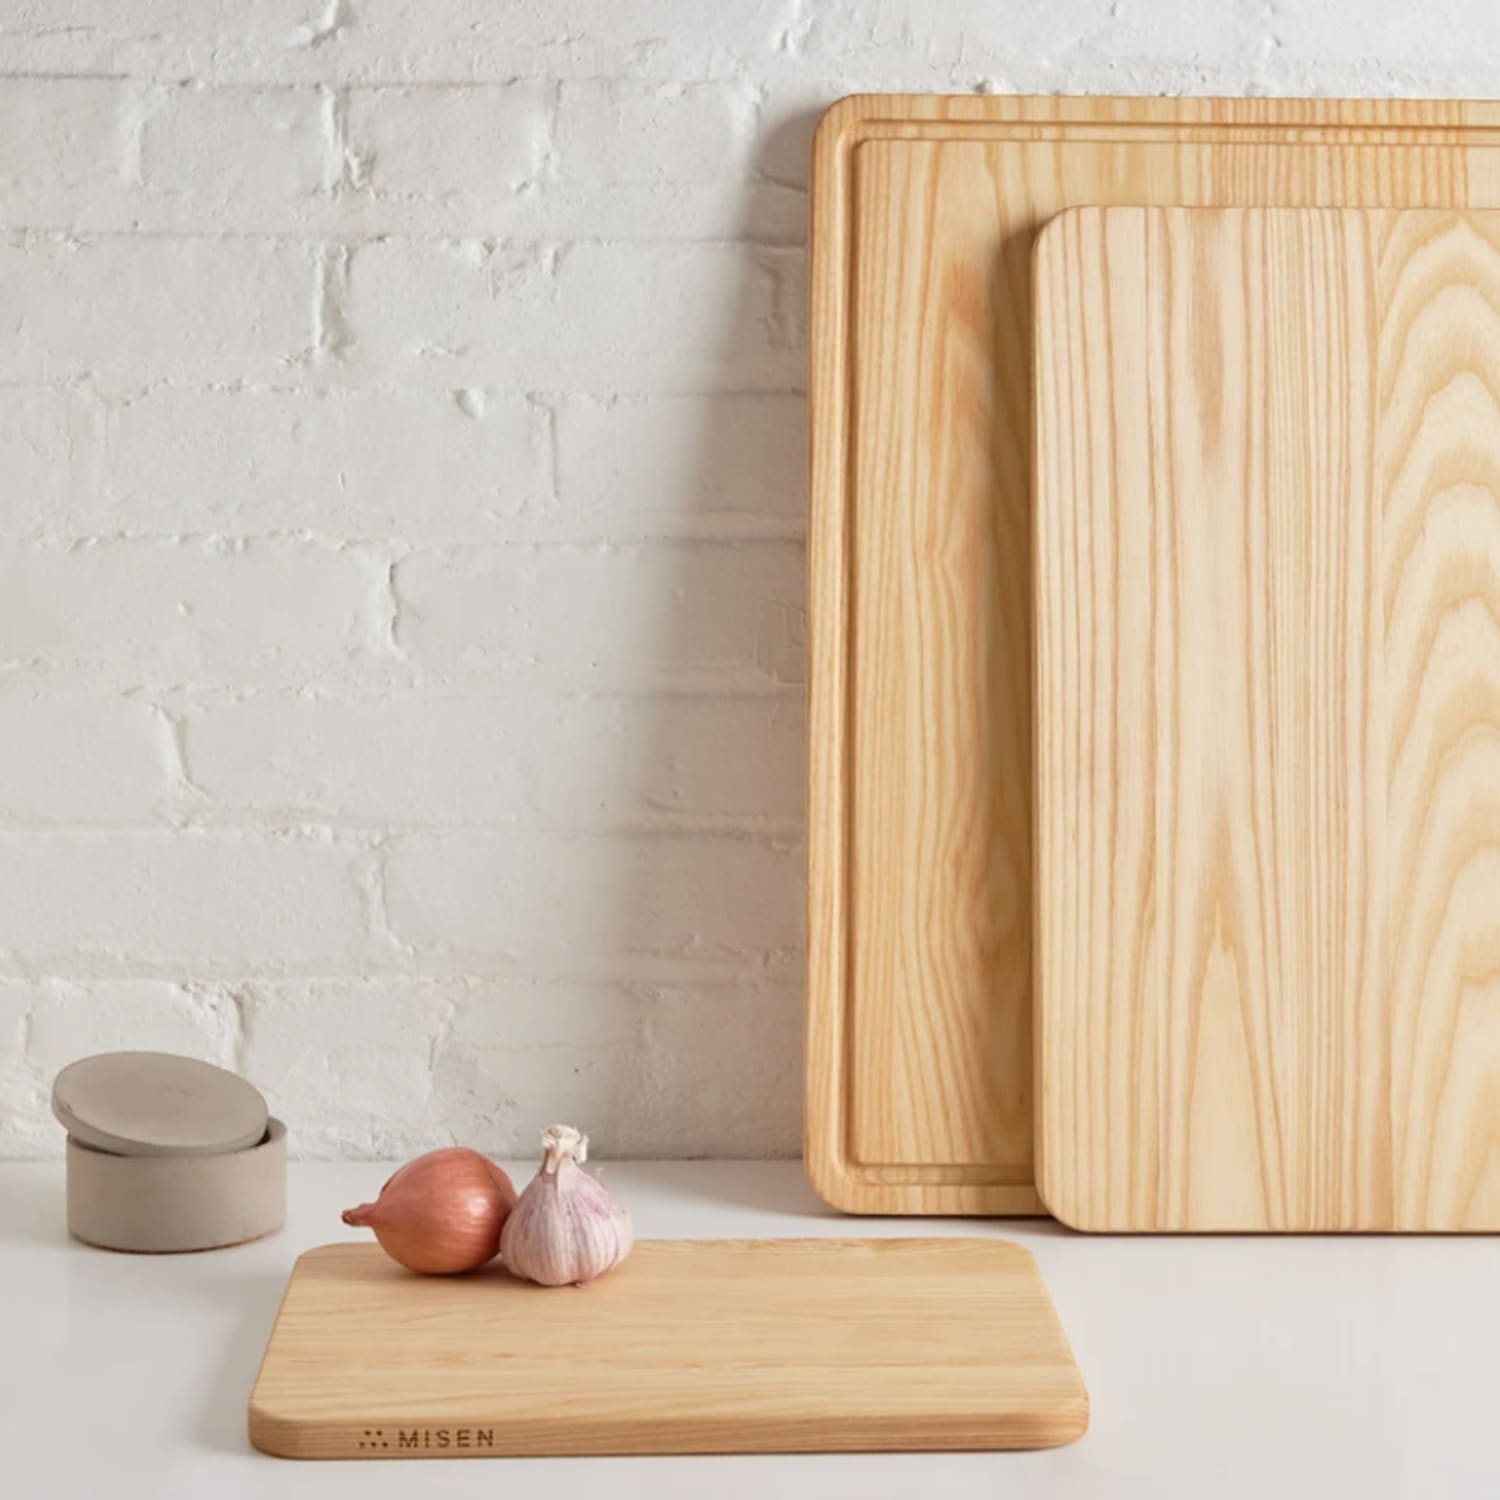 Misen Just Launched a Series of Wood Cutting Boards Perfect for Meal Prep